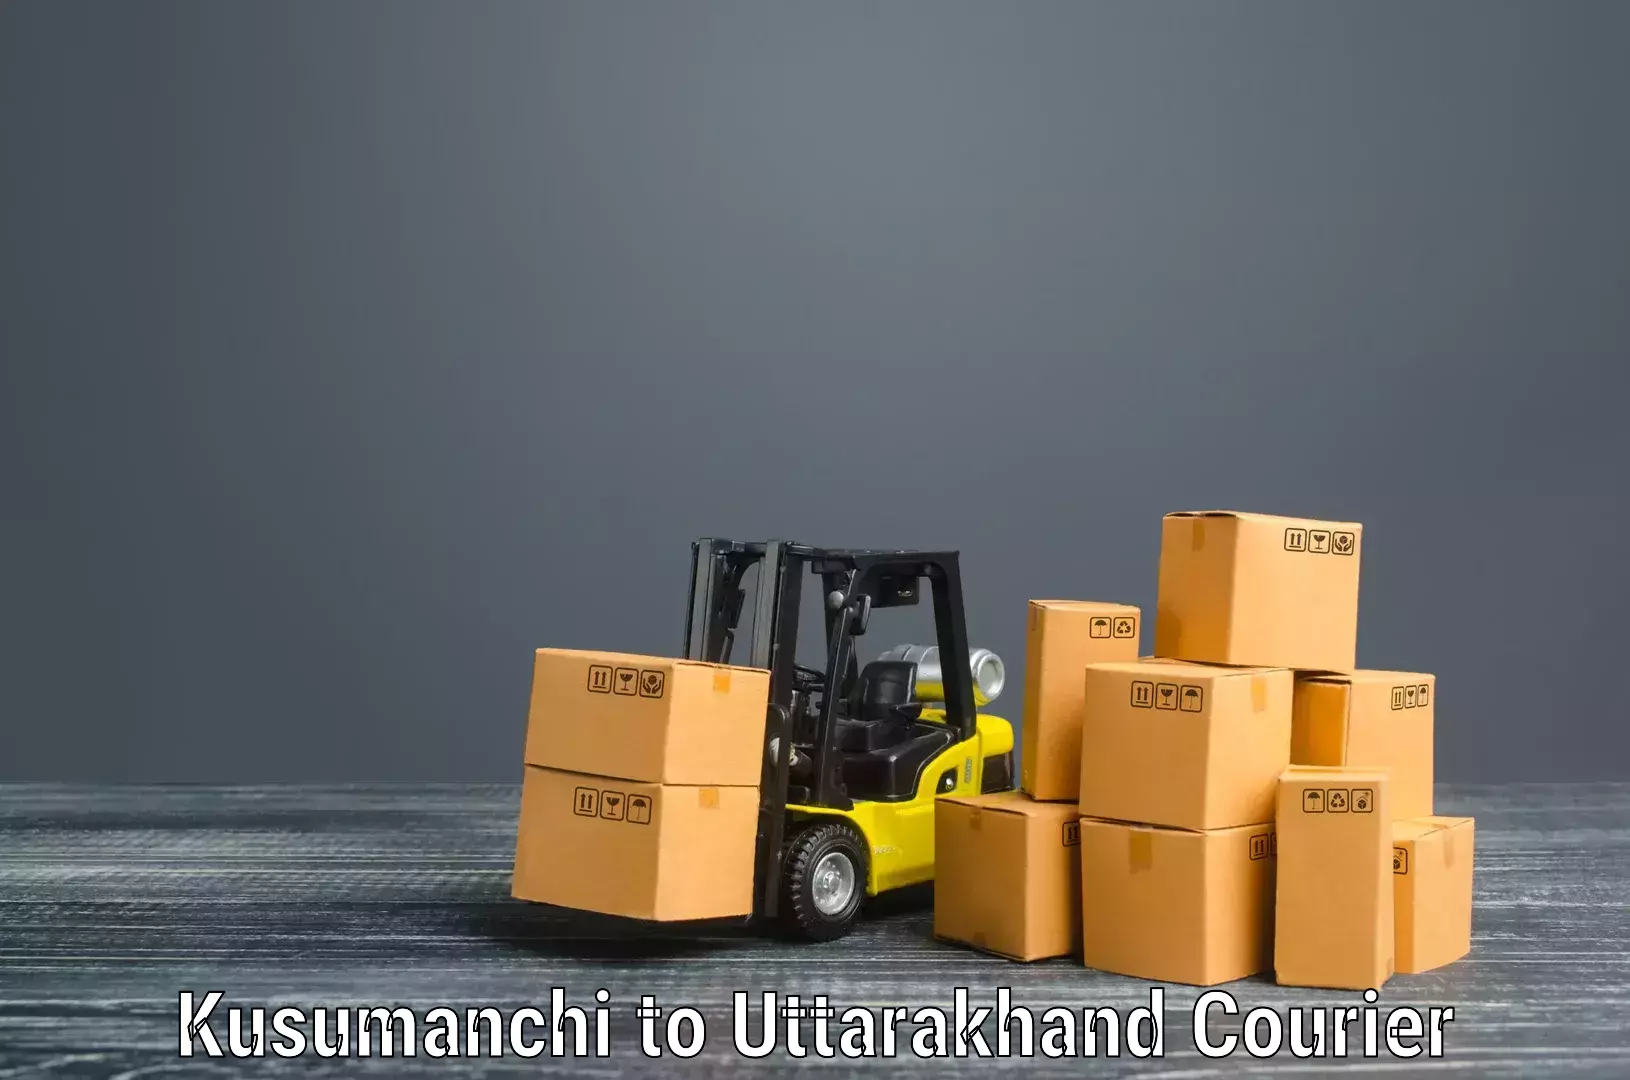 Furniture shipping services in Kusumanchi to Roorkee